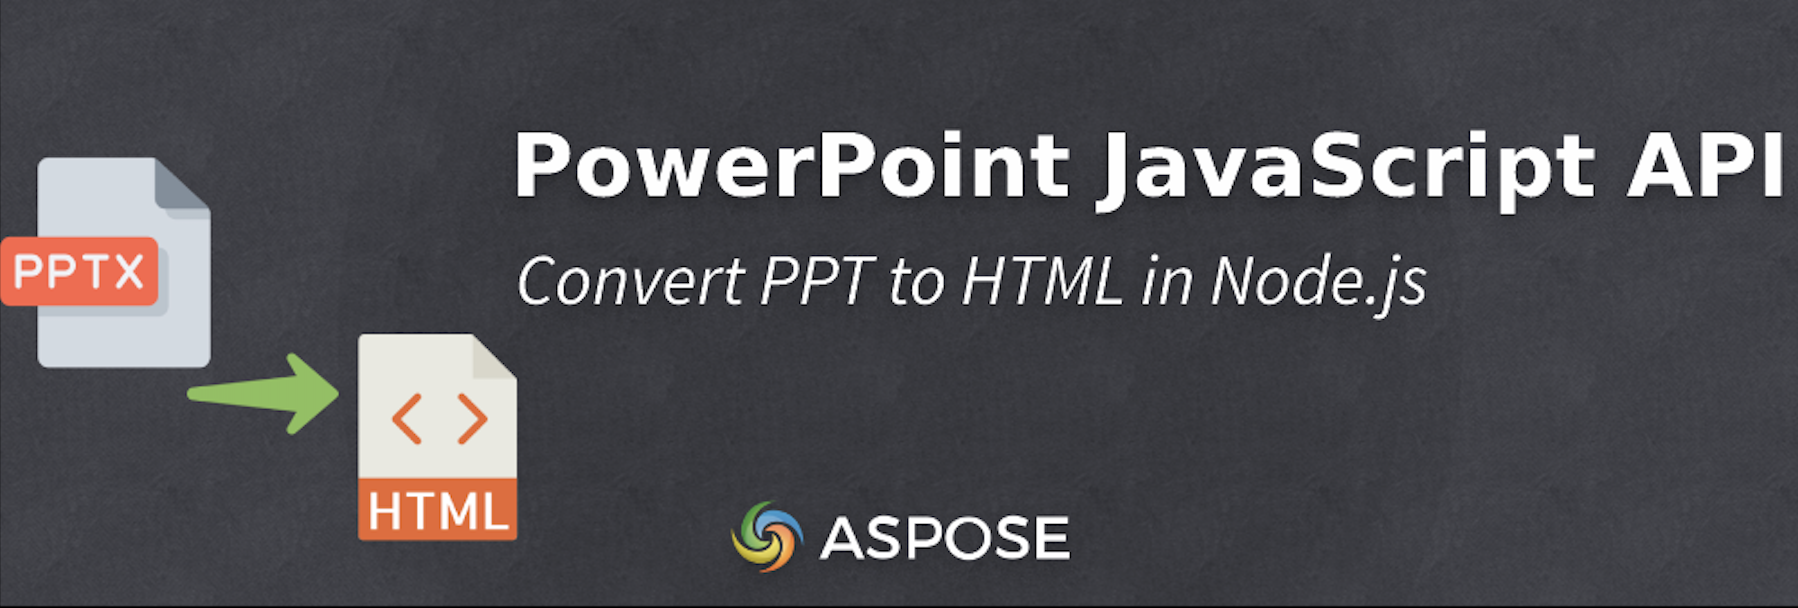 Convert PPT to HTML in Node.js - PowerPoint JavaScript API